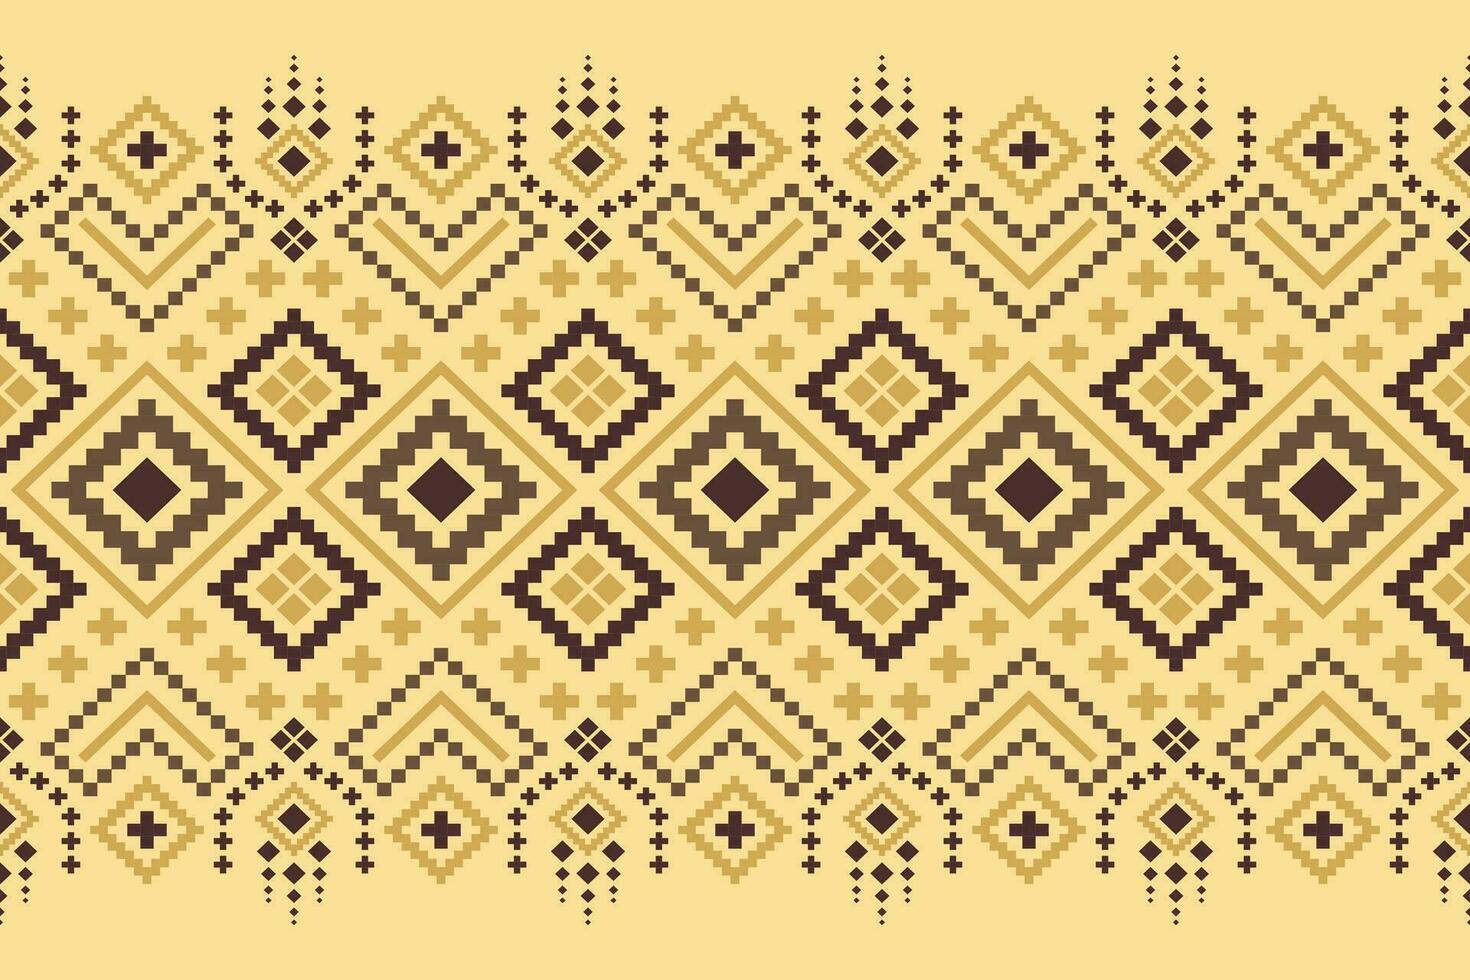 Yellow vintages cross stitch traditional ethnic pattern paisley flower Ikat background abstract Aztec African Indonesian Indian seamless pattern for fabric print cloth dress carpet curtains and sarong vector